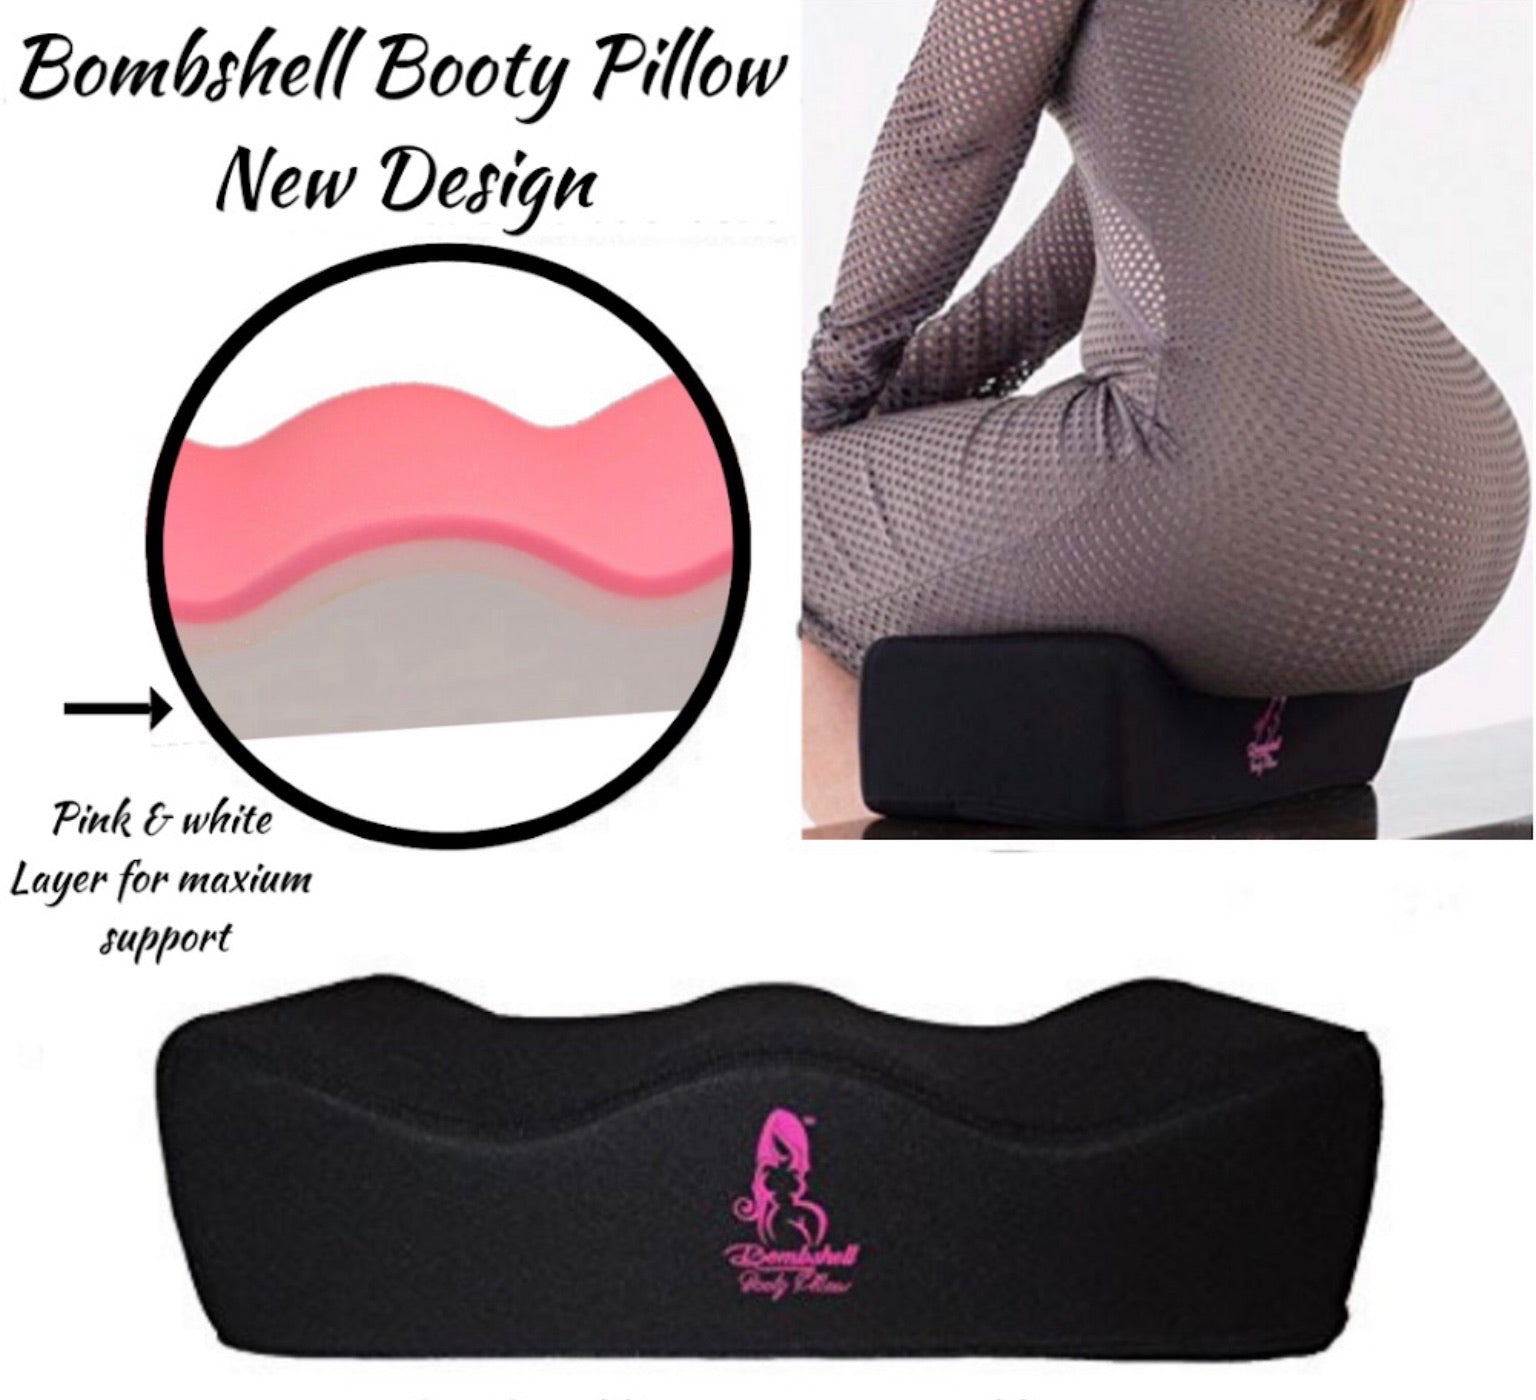 BBL POST OP SUPPLIES PACKAGE FOR PLASTIC SURGERY - Bombshell Booty Pillow